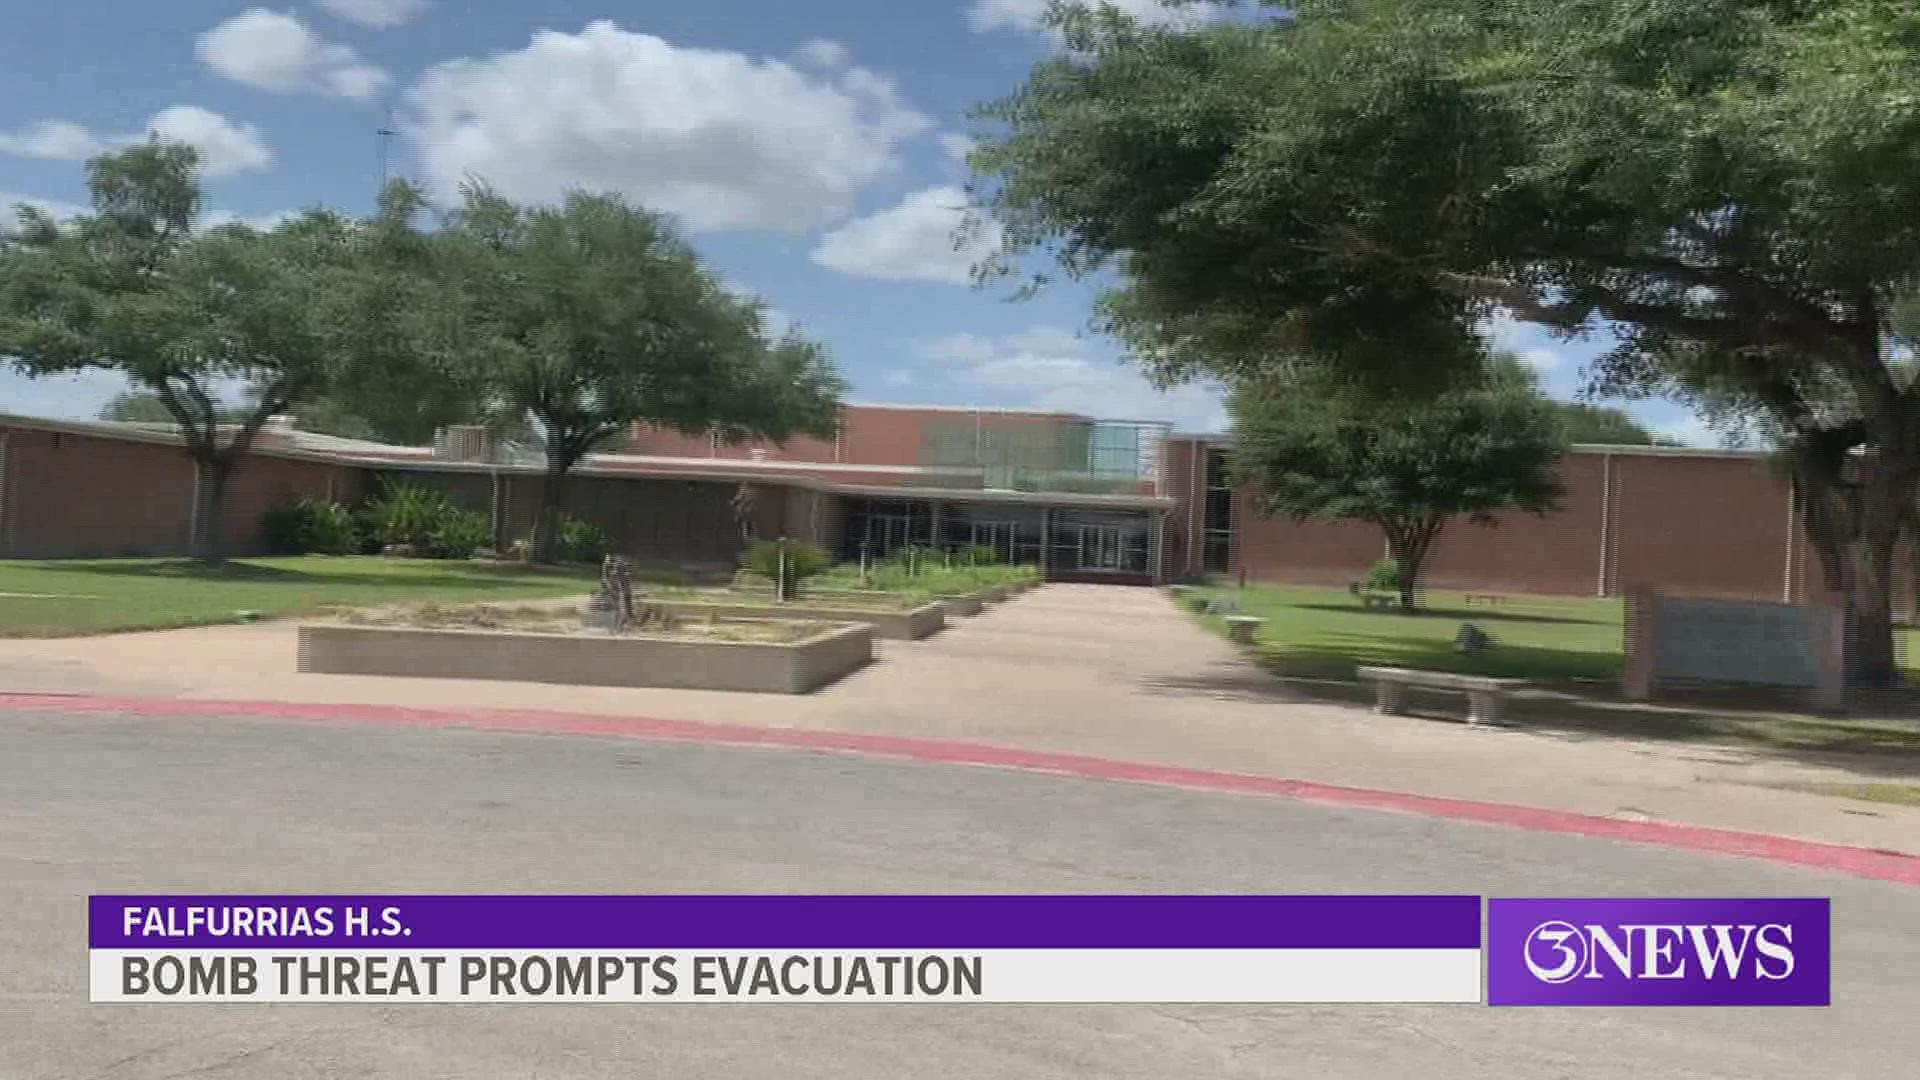 Students and staff were evacuated to the Falfurrias Jr. High gym, a post from Falfurrias Police Department said.